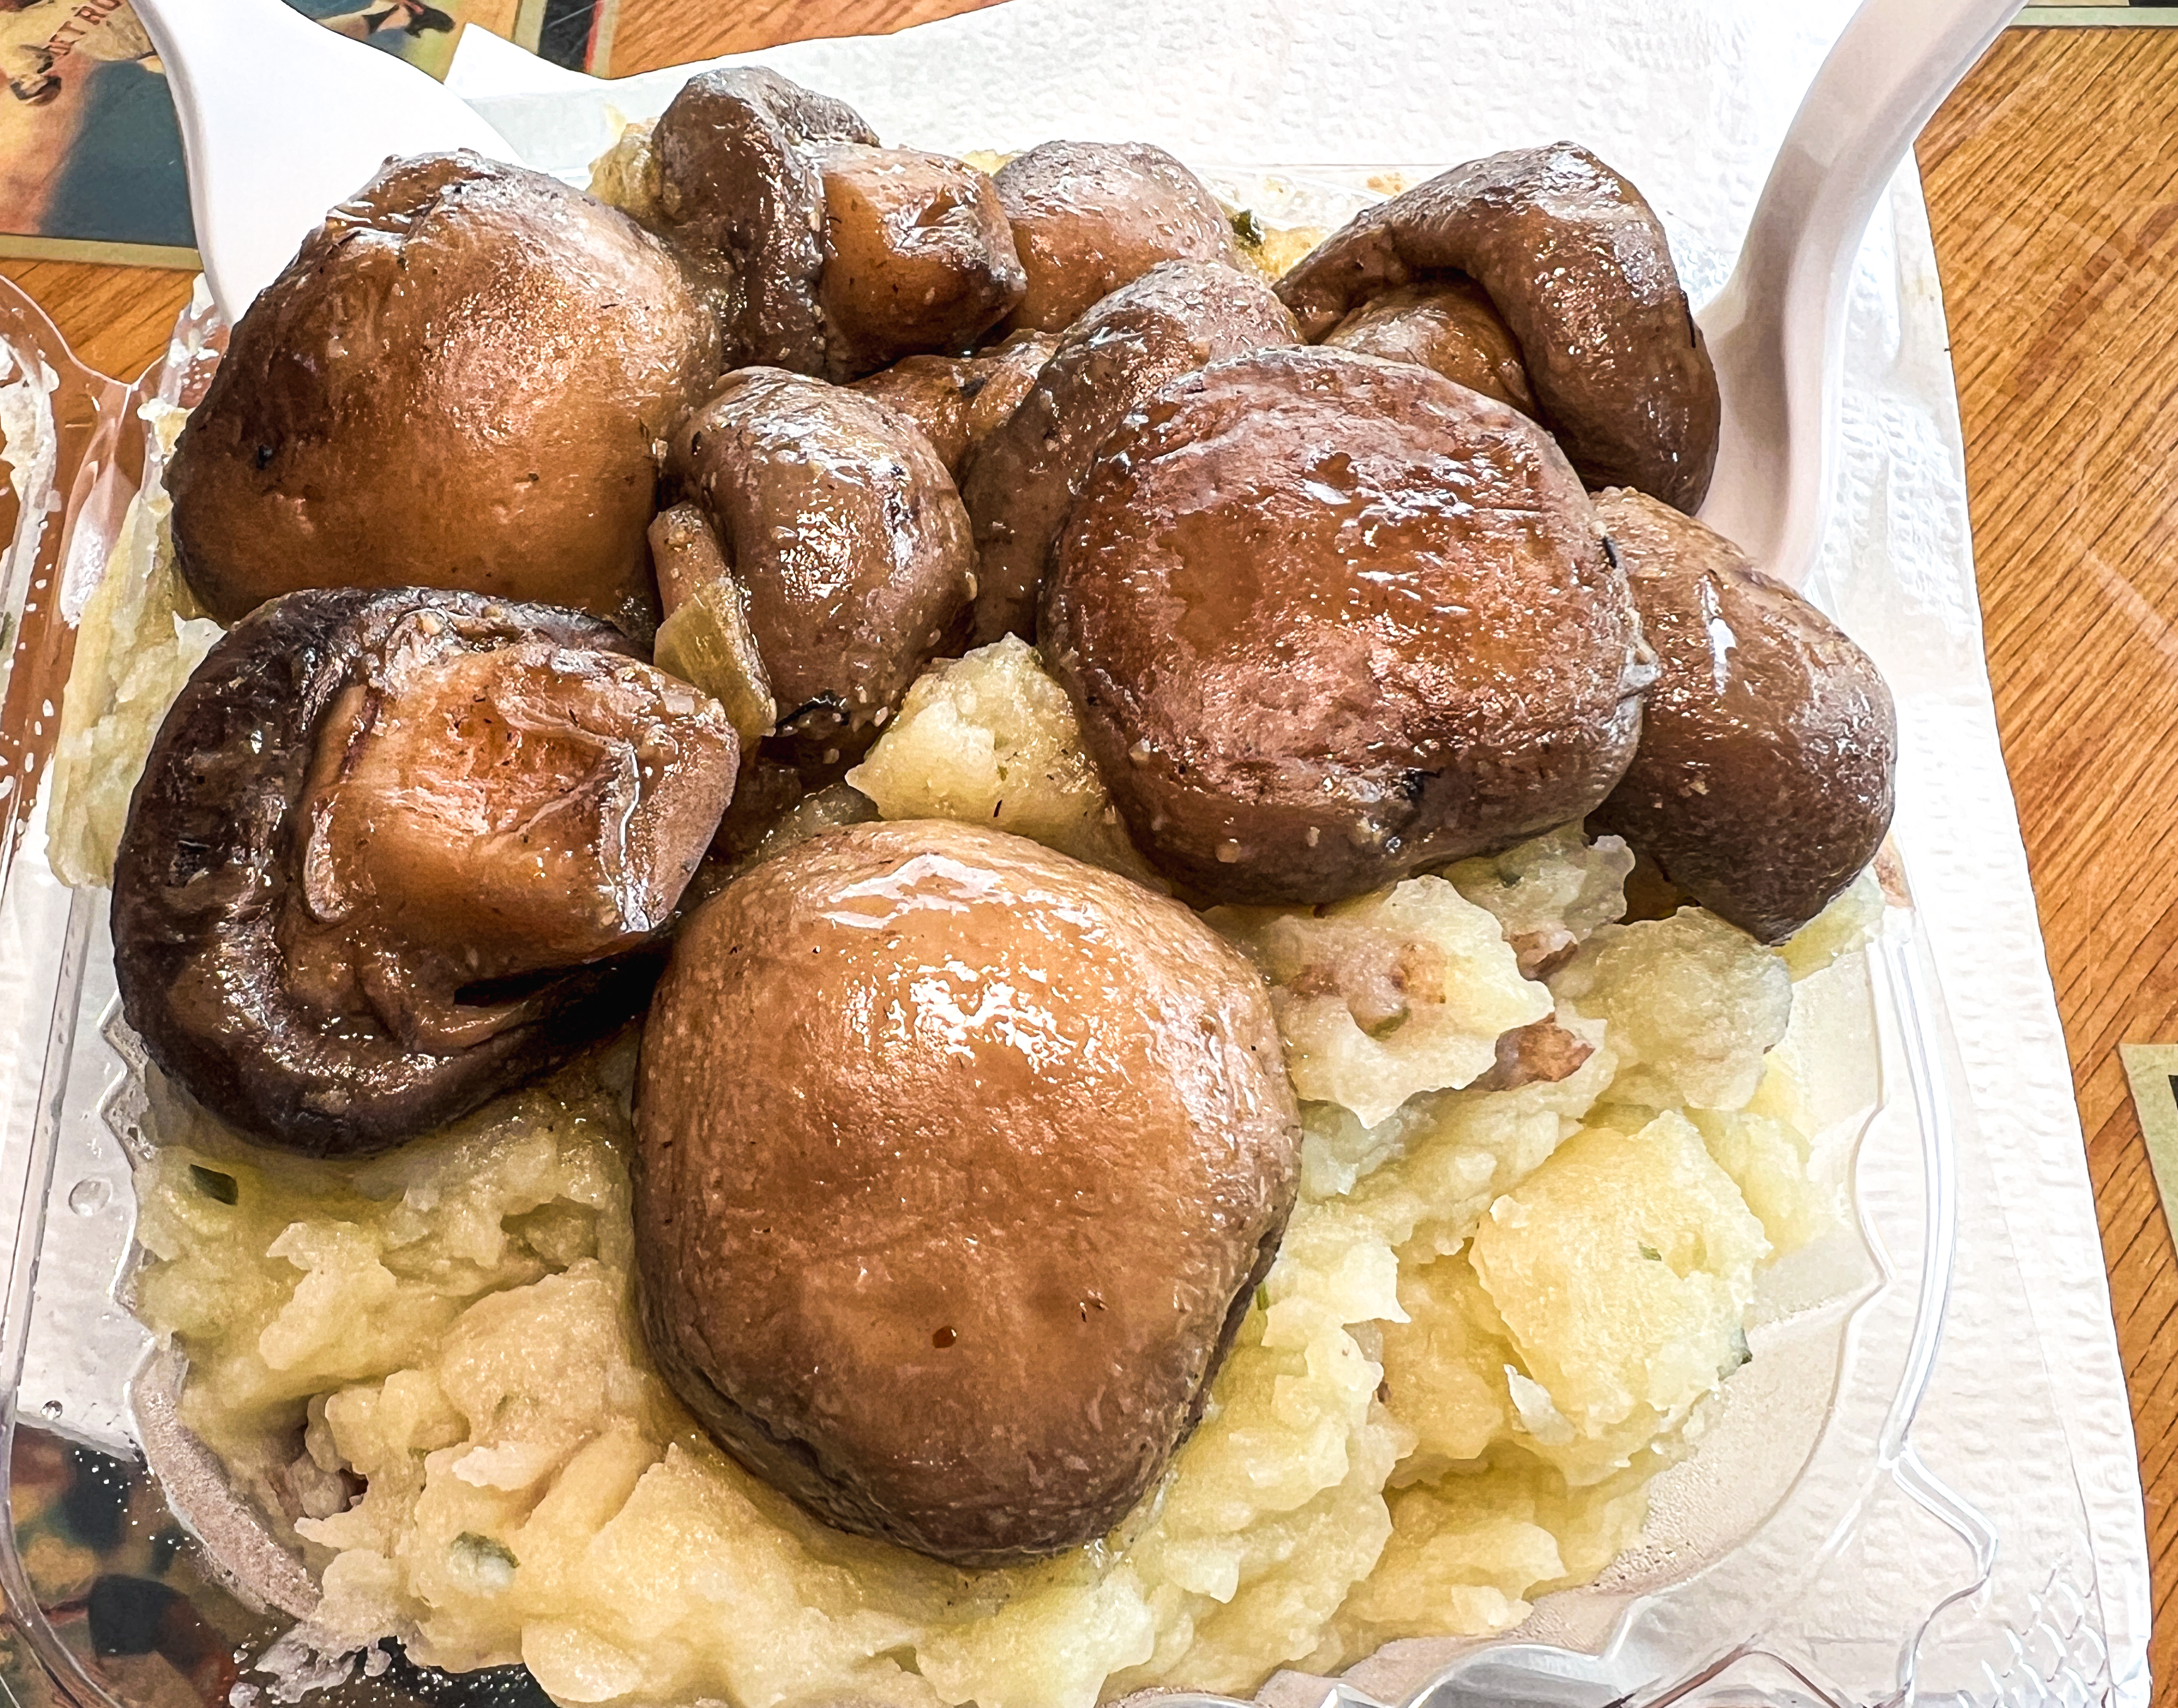 The veggie dinner at Pickel Barrel is among the hidden gems at the New York State Fair. (Charlie Miller | cmiller@syracuse.com)